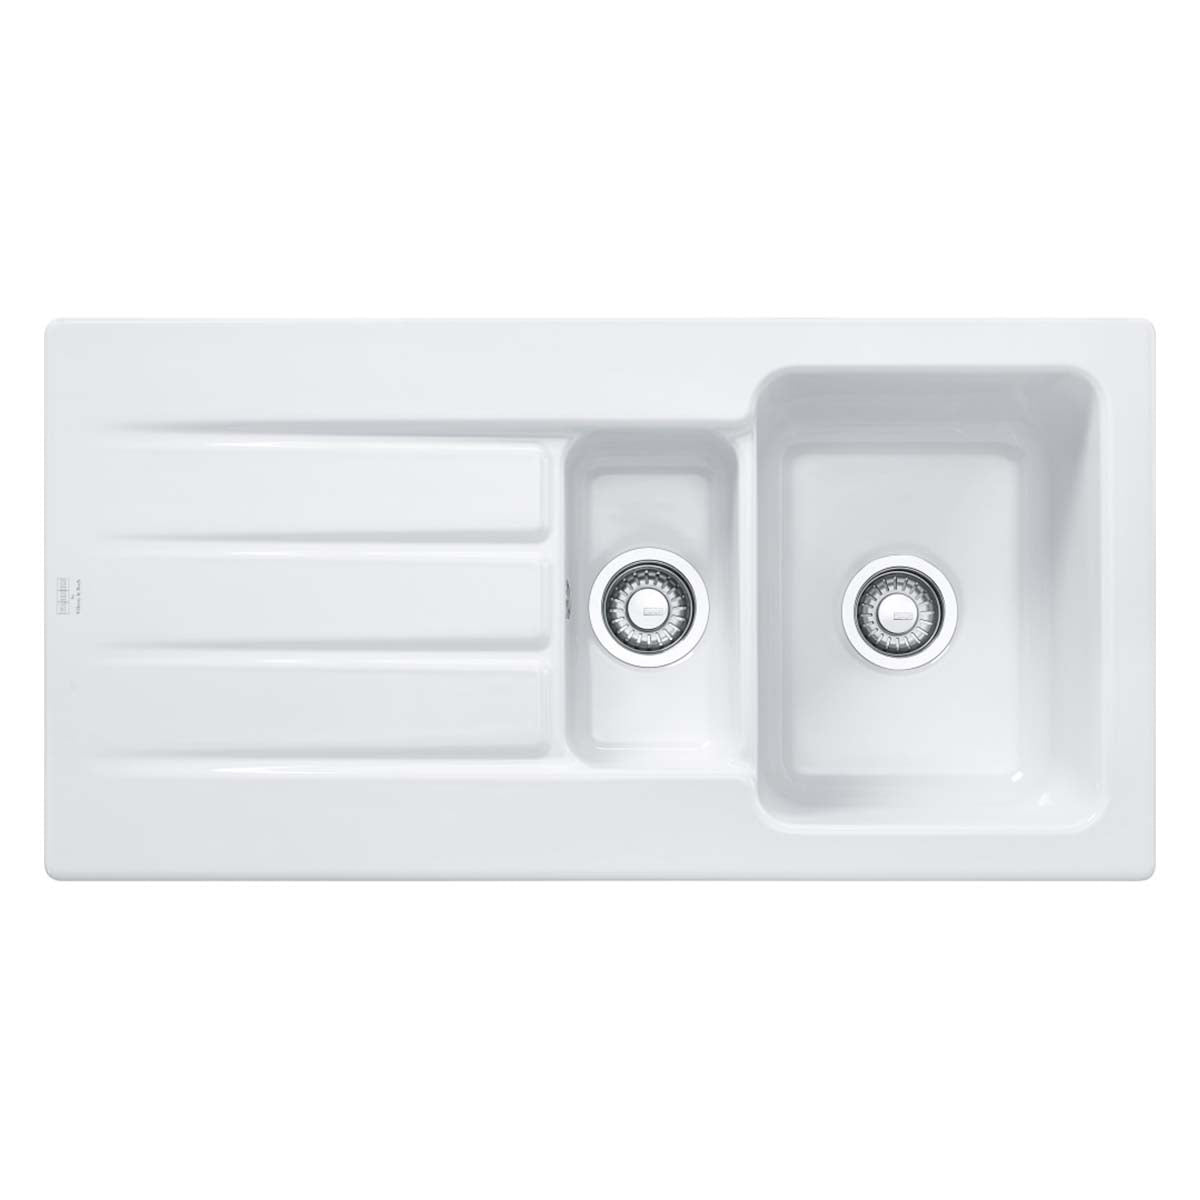 Franke Arcana AHK 651 1.5 bowl top mounted kitchen sink with drainboard ceramic 1000x510mm gloss white